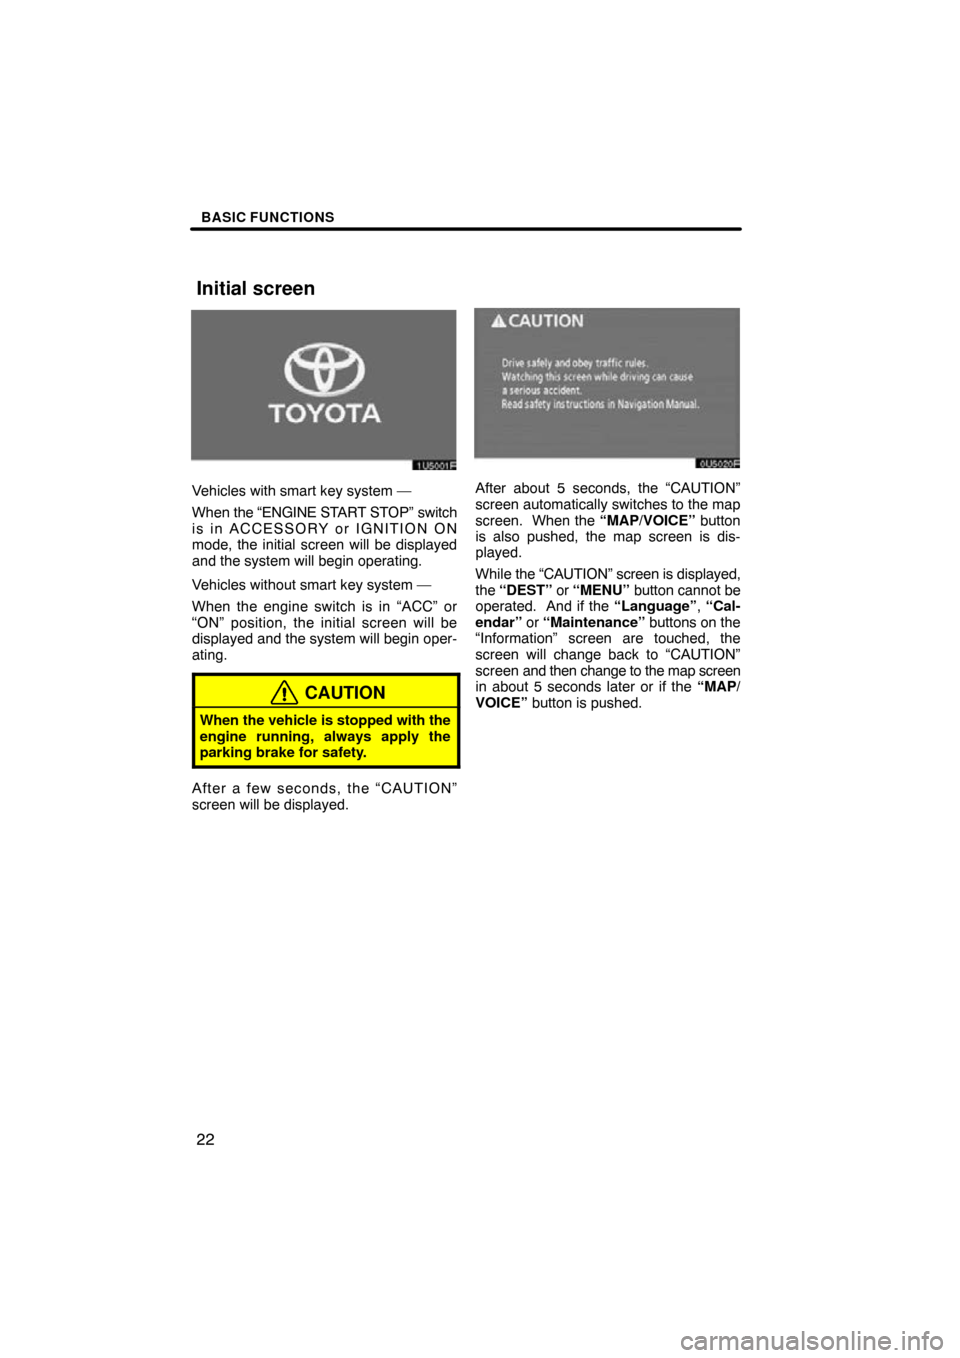 TOYOTA CAMRY 2009 XV40 / 8.G Navigation Manual BASIC FUNCTIONS
22
Vehicles with smart key system —
When the “ENGINE START STOP” switch
is in ACCESSORY or IGNITION ON
mode, the initial screen will be displayed
and the system will begin operat